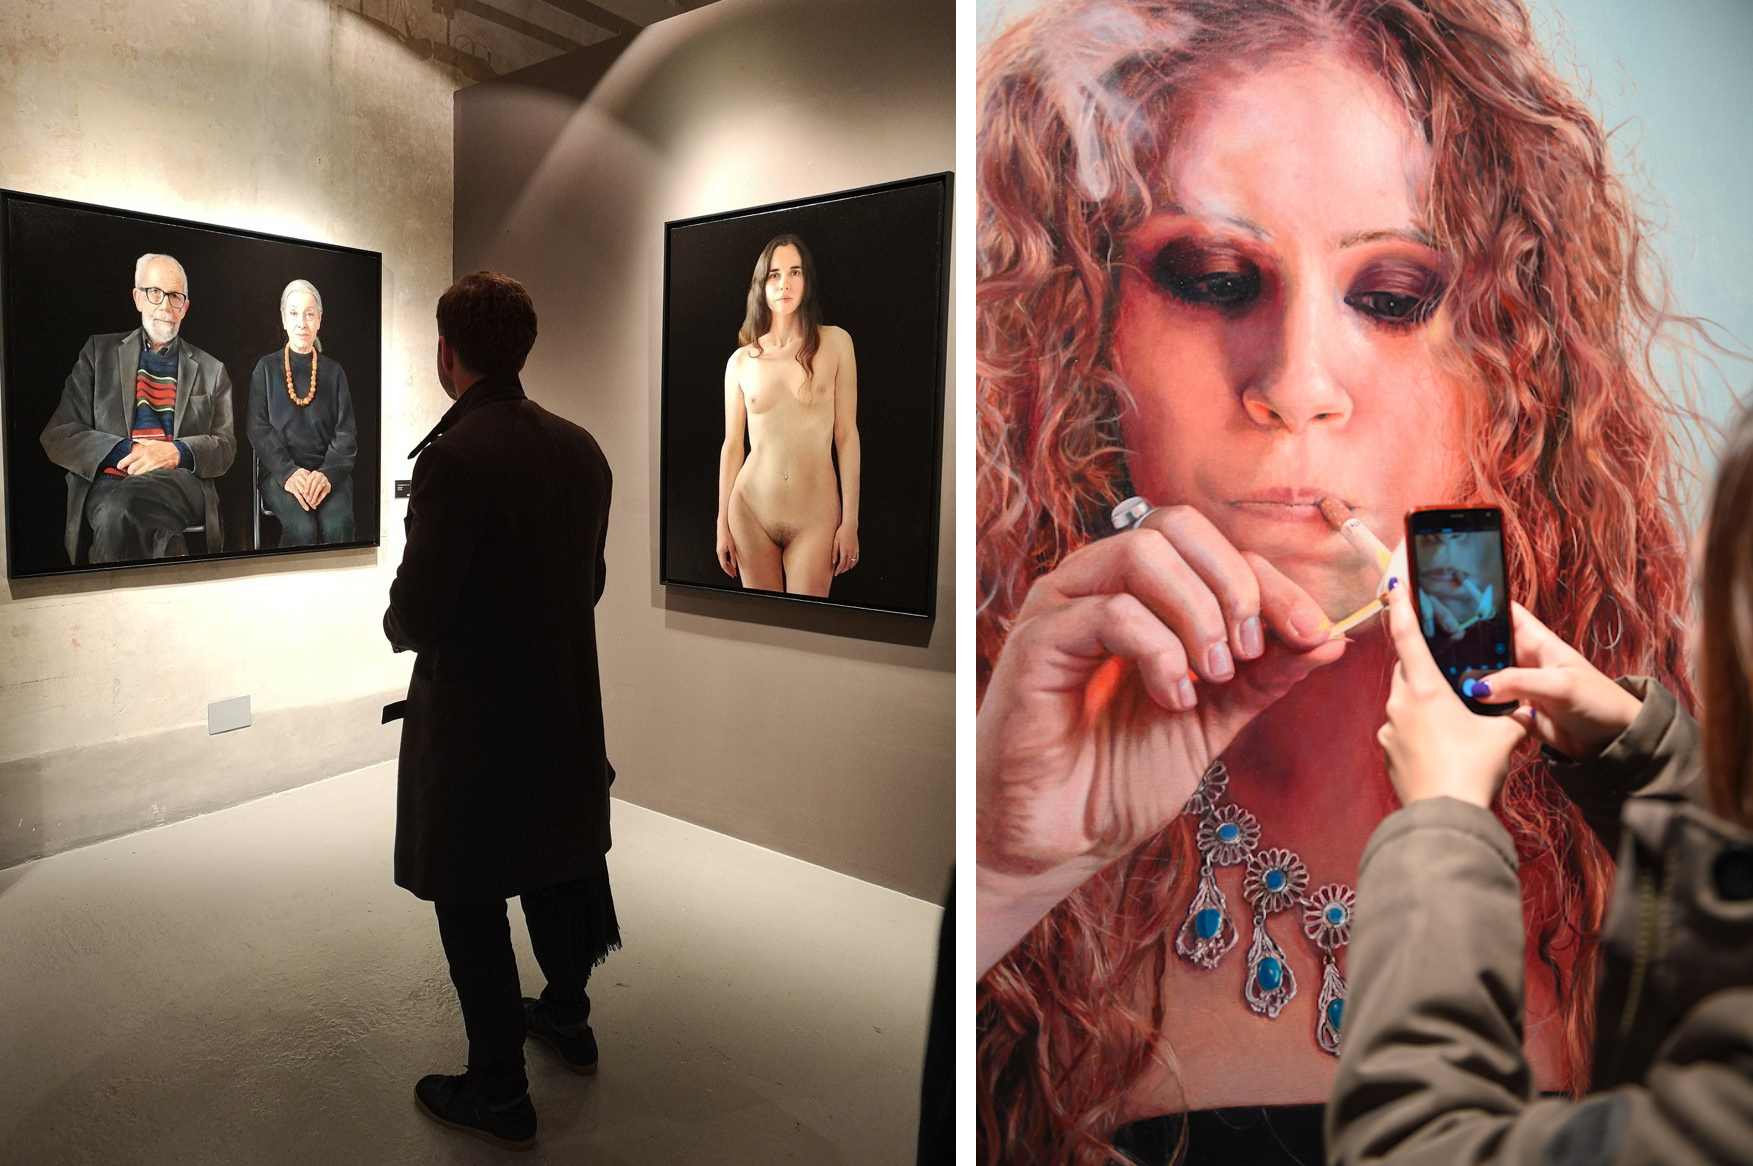 Left: Paintings by Anne-Christine Roda -  Michèle et Michel  (left) and  Anwen  (right)  Right: Tanya Atanasova’s painting entitled  Smokey Eyes / Joëlle